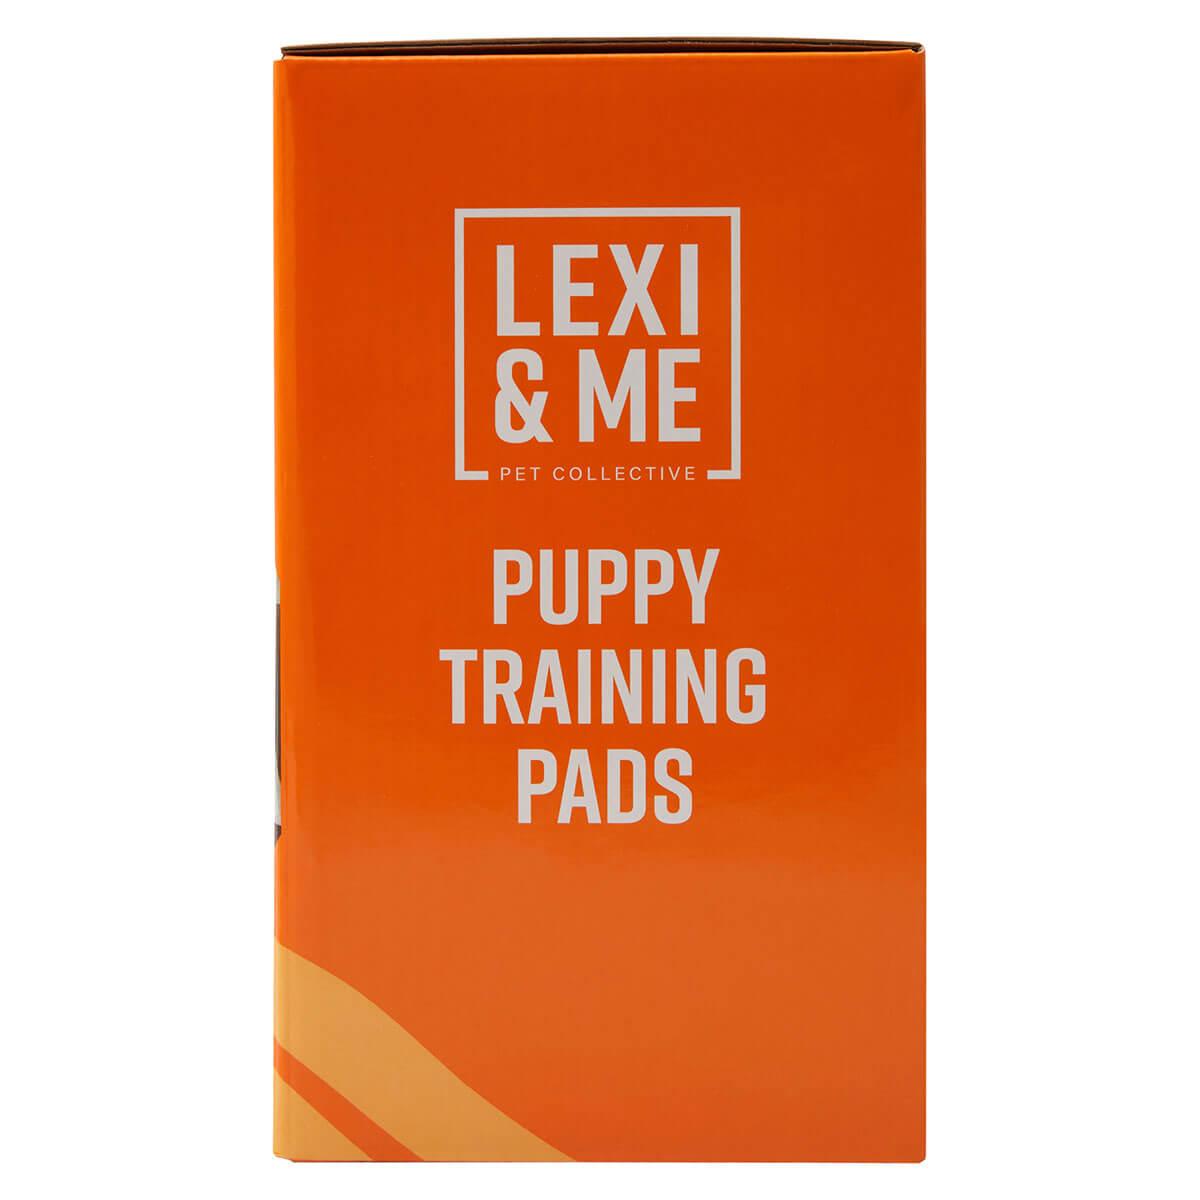 Lexi & Me Puppy Training Pads